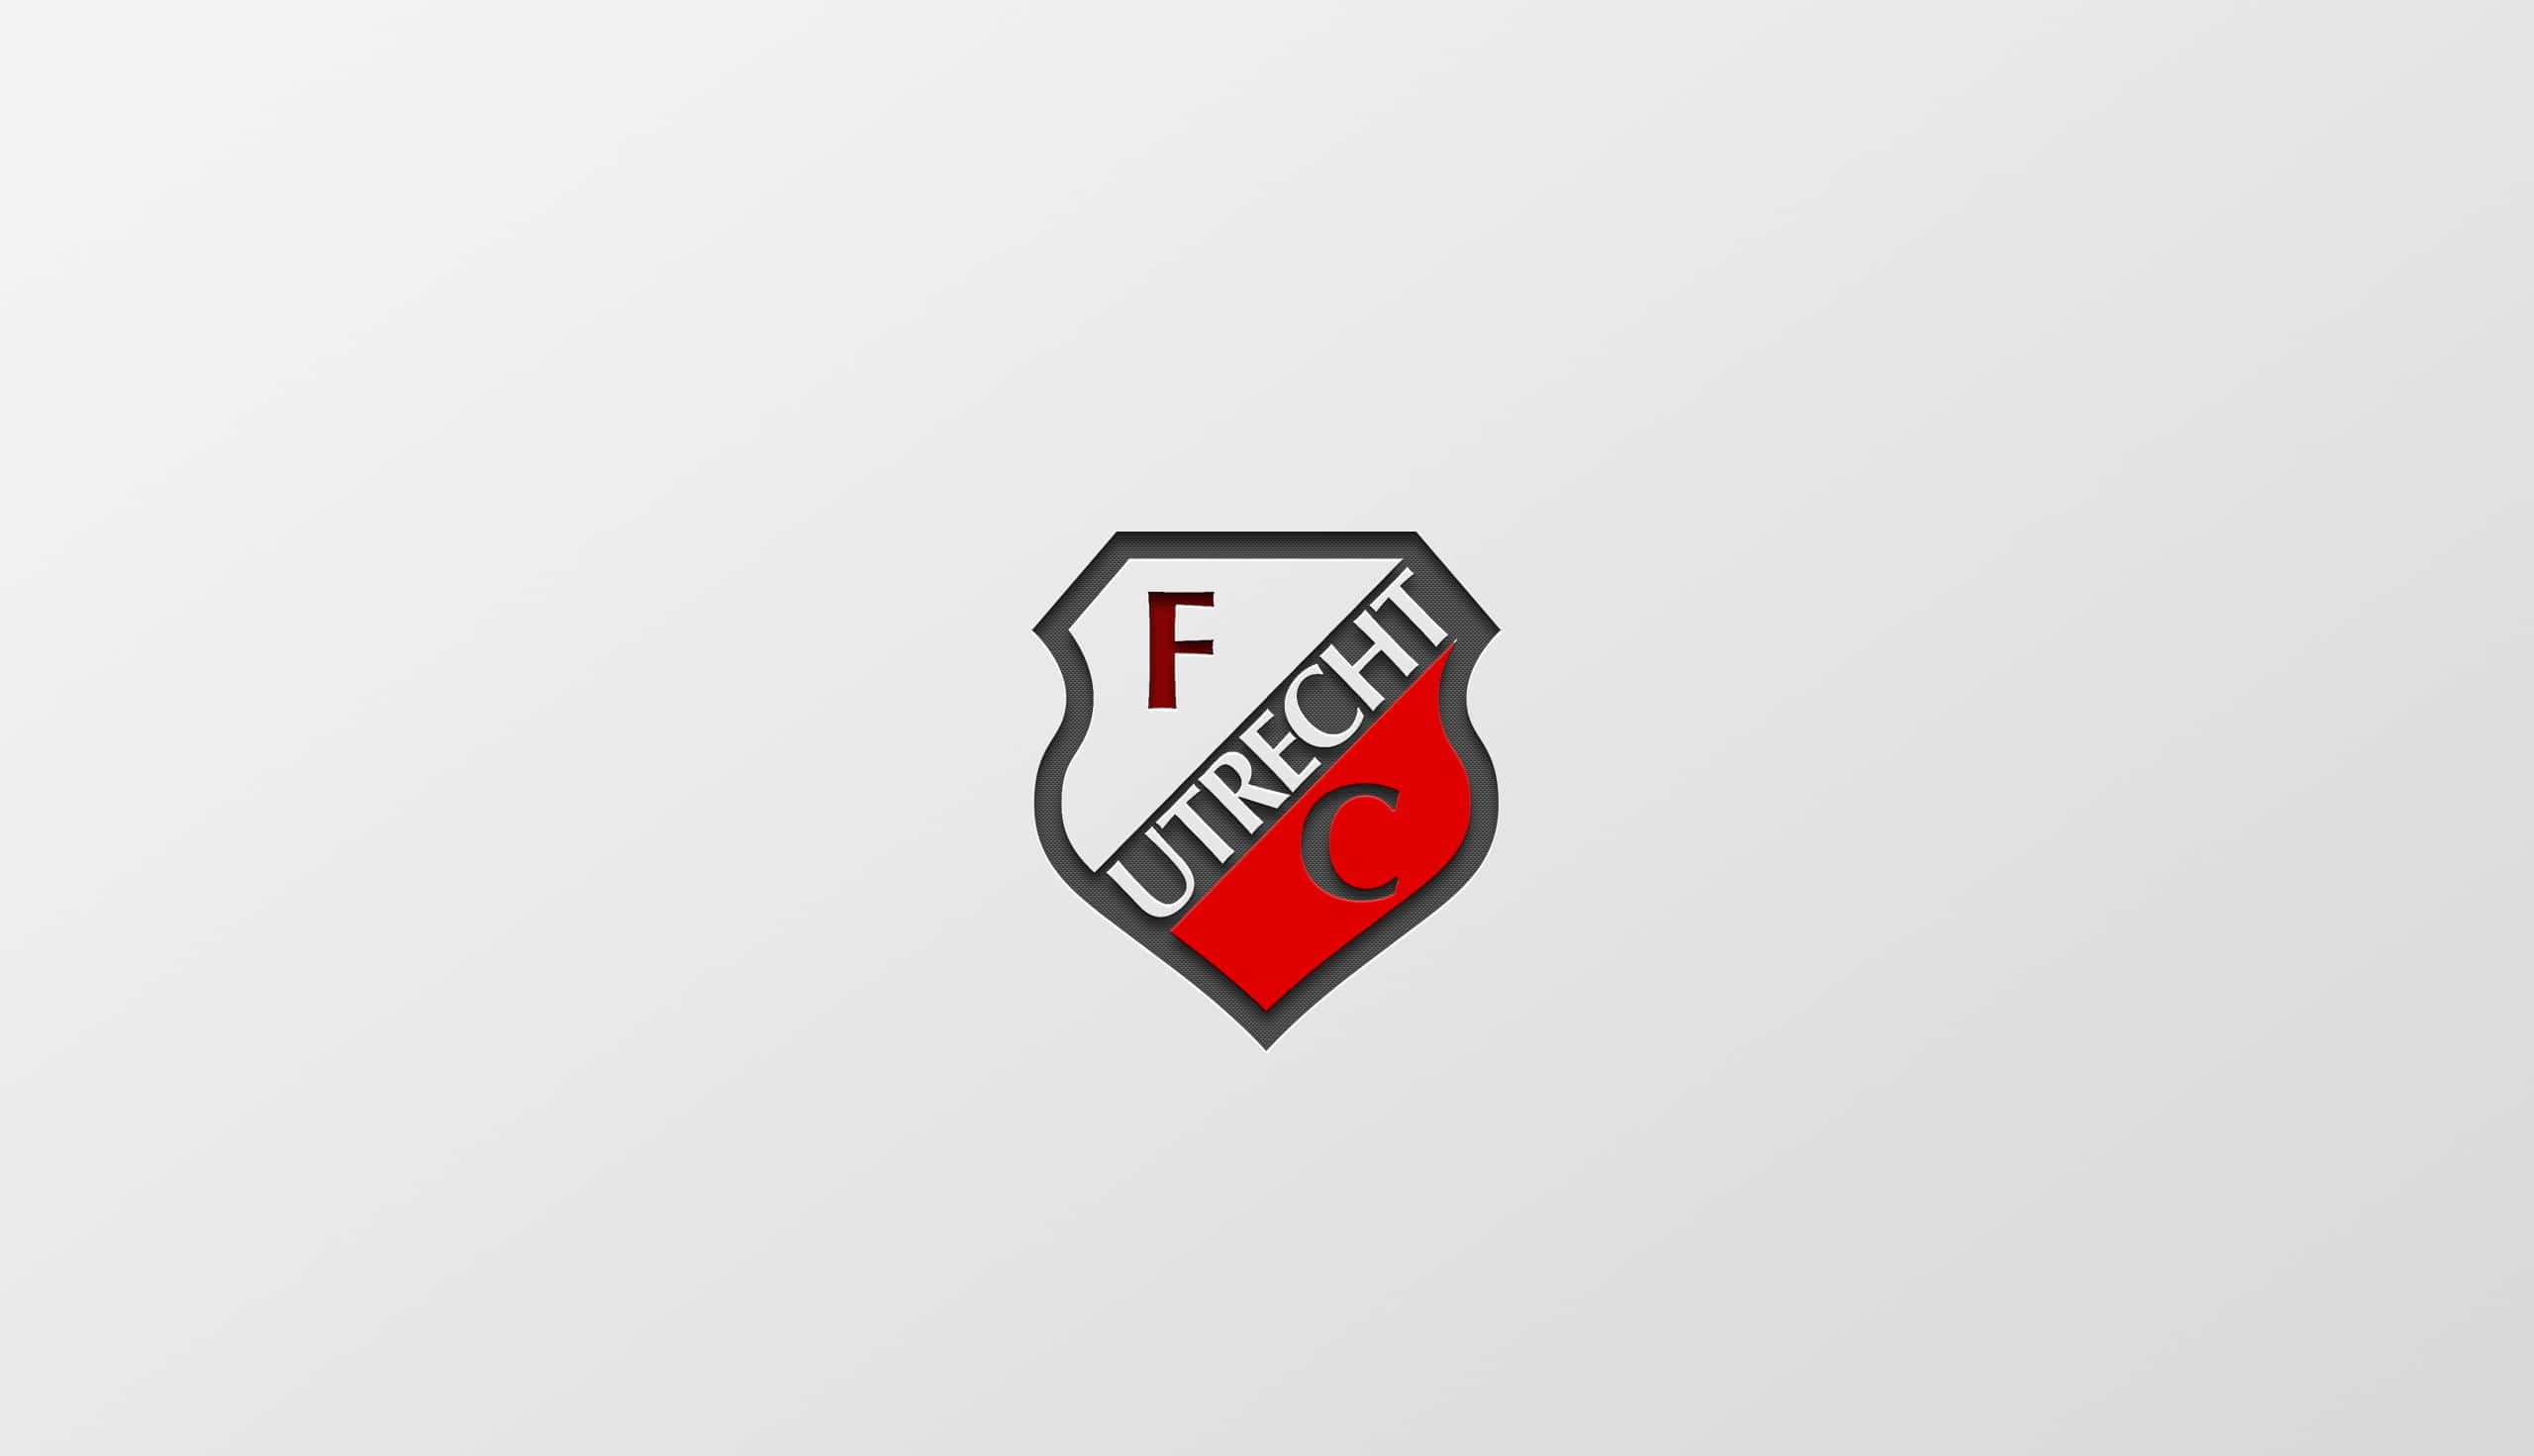 Celebrate Football and Passion with Eredivisie Wallpaper